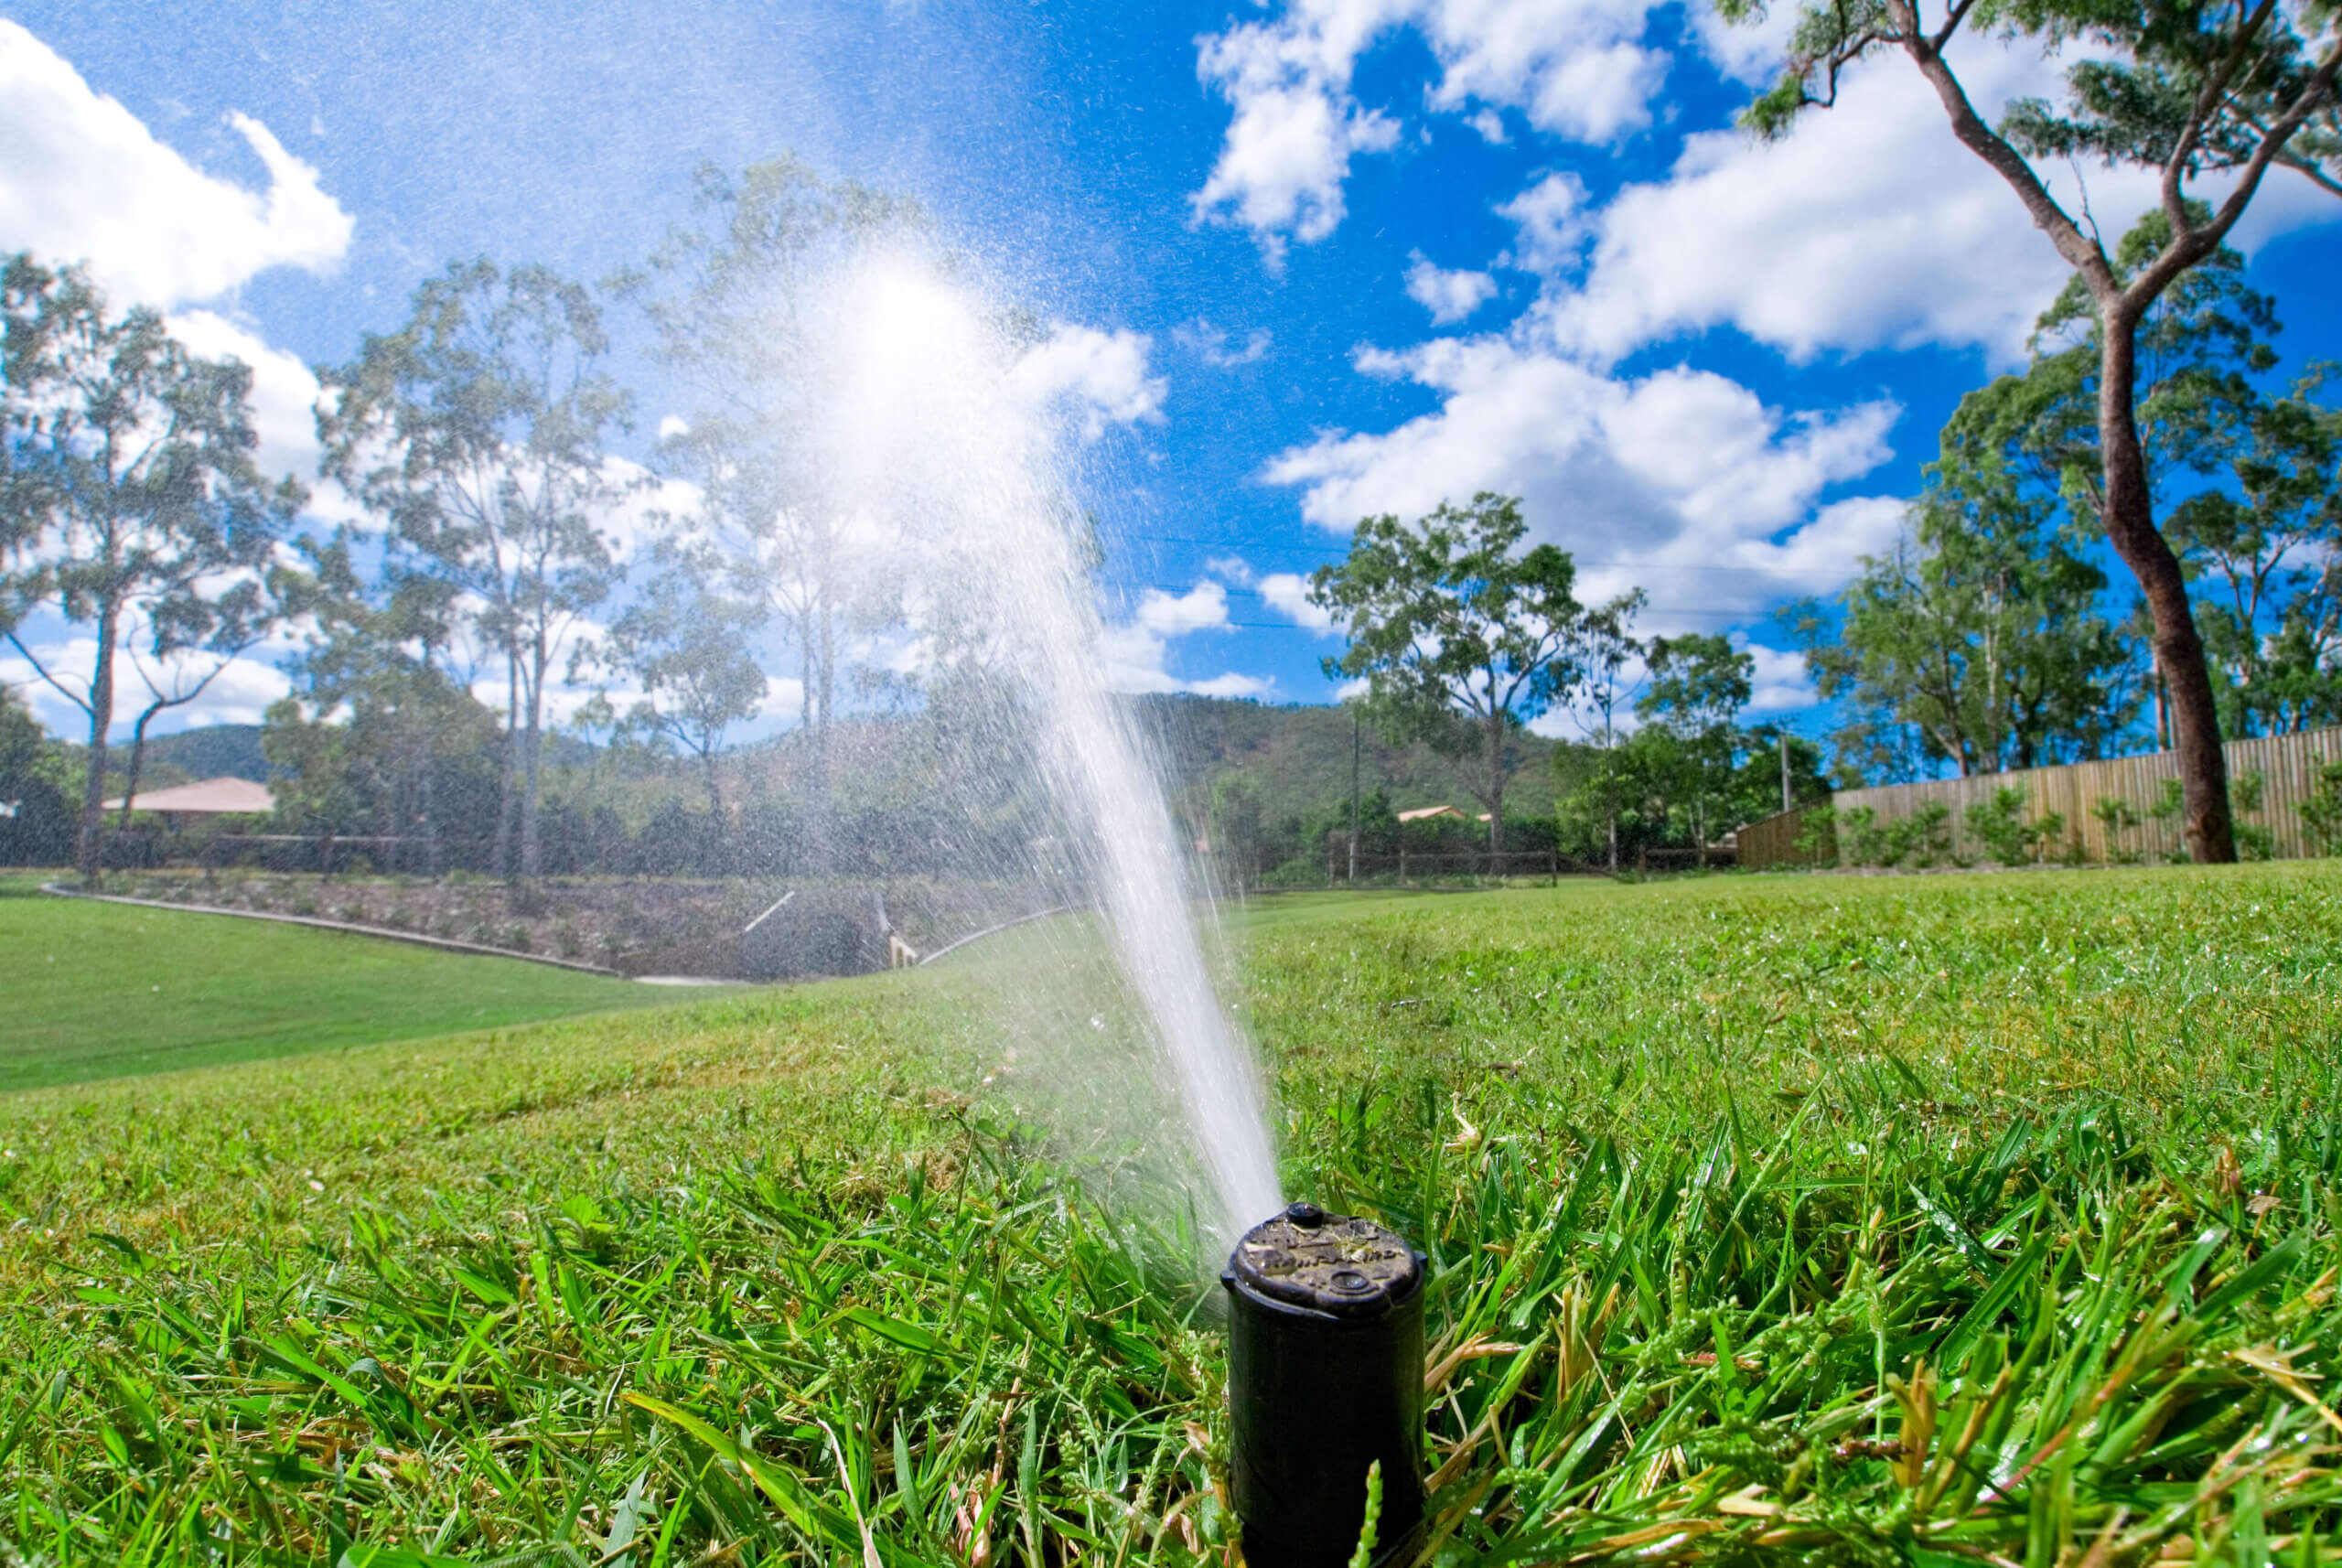 Watering via Irrigation and Sprinkler systems now has to be very water efficient due to water shortages. This is an example of very effective watering whilst being very efficient by using a minimal amount of water.